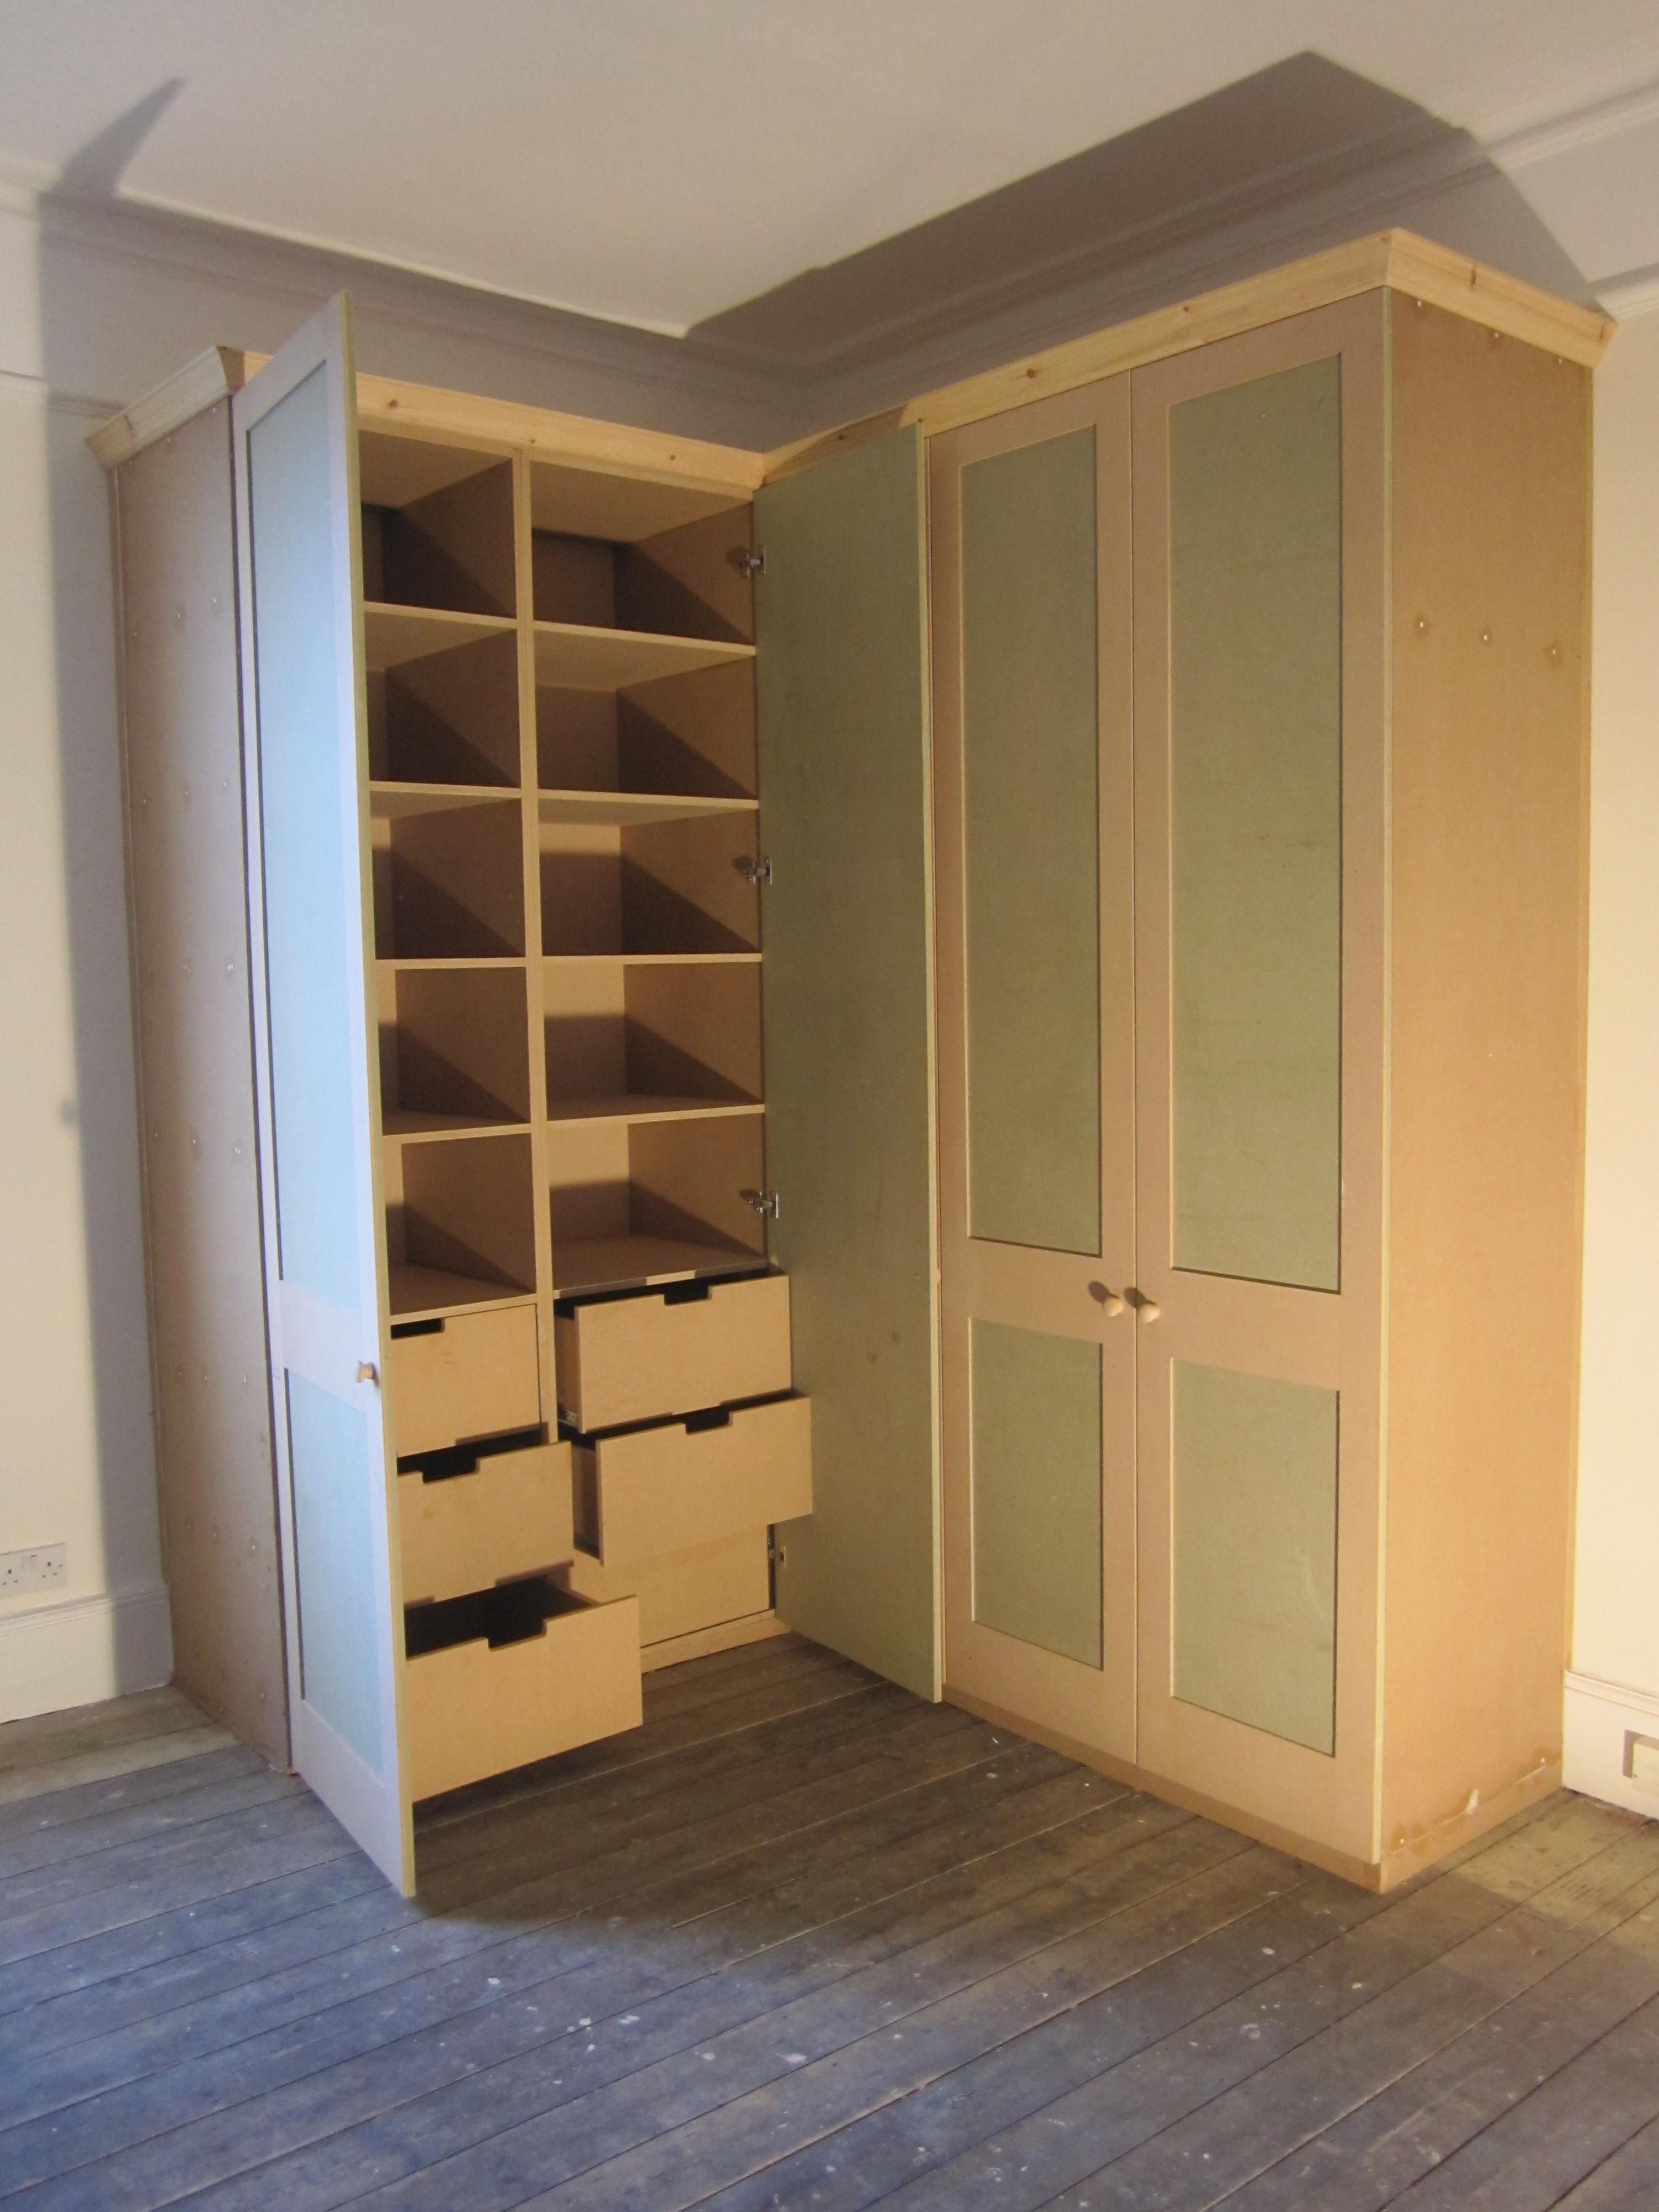 For Idea Of Drawer Shape Only Closets Pinterest Drawers And Inside Wardrobes With Shelves (View 14 of 15)